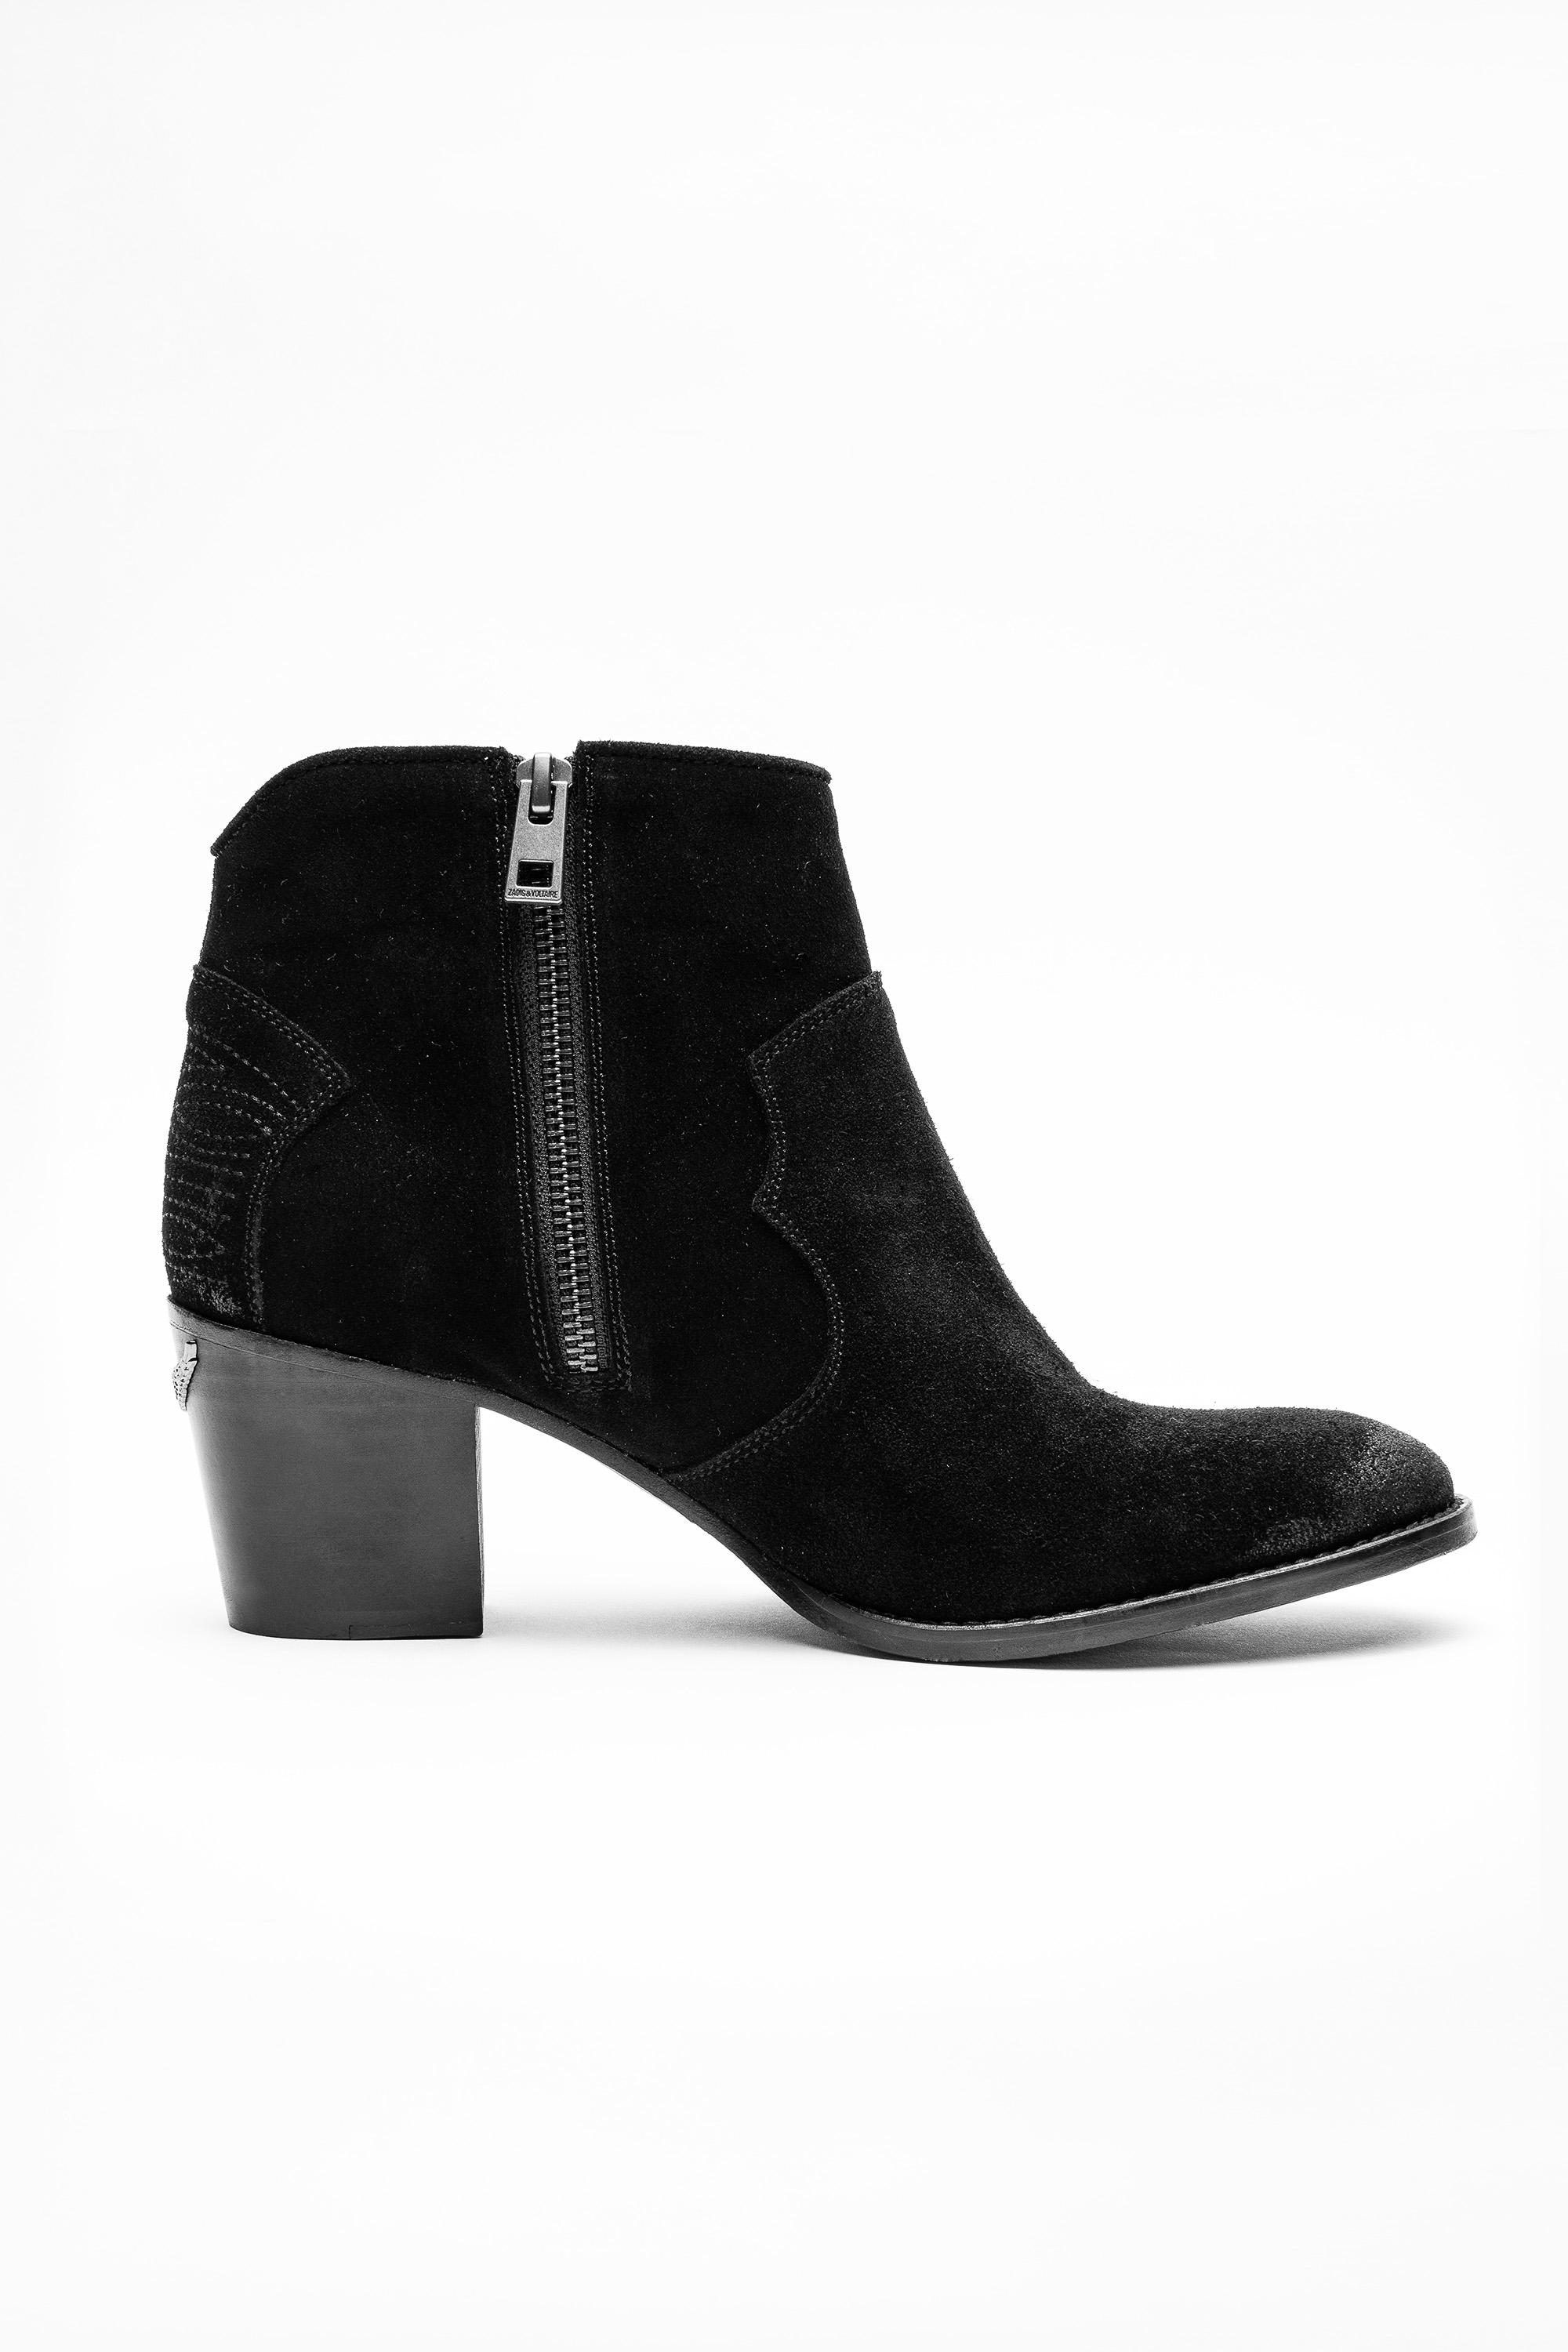 Zadig & Voltaire Molly Suede Boots in Black - Lyst